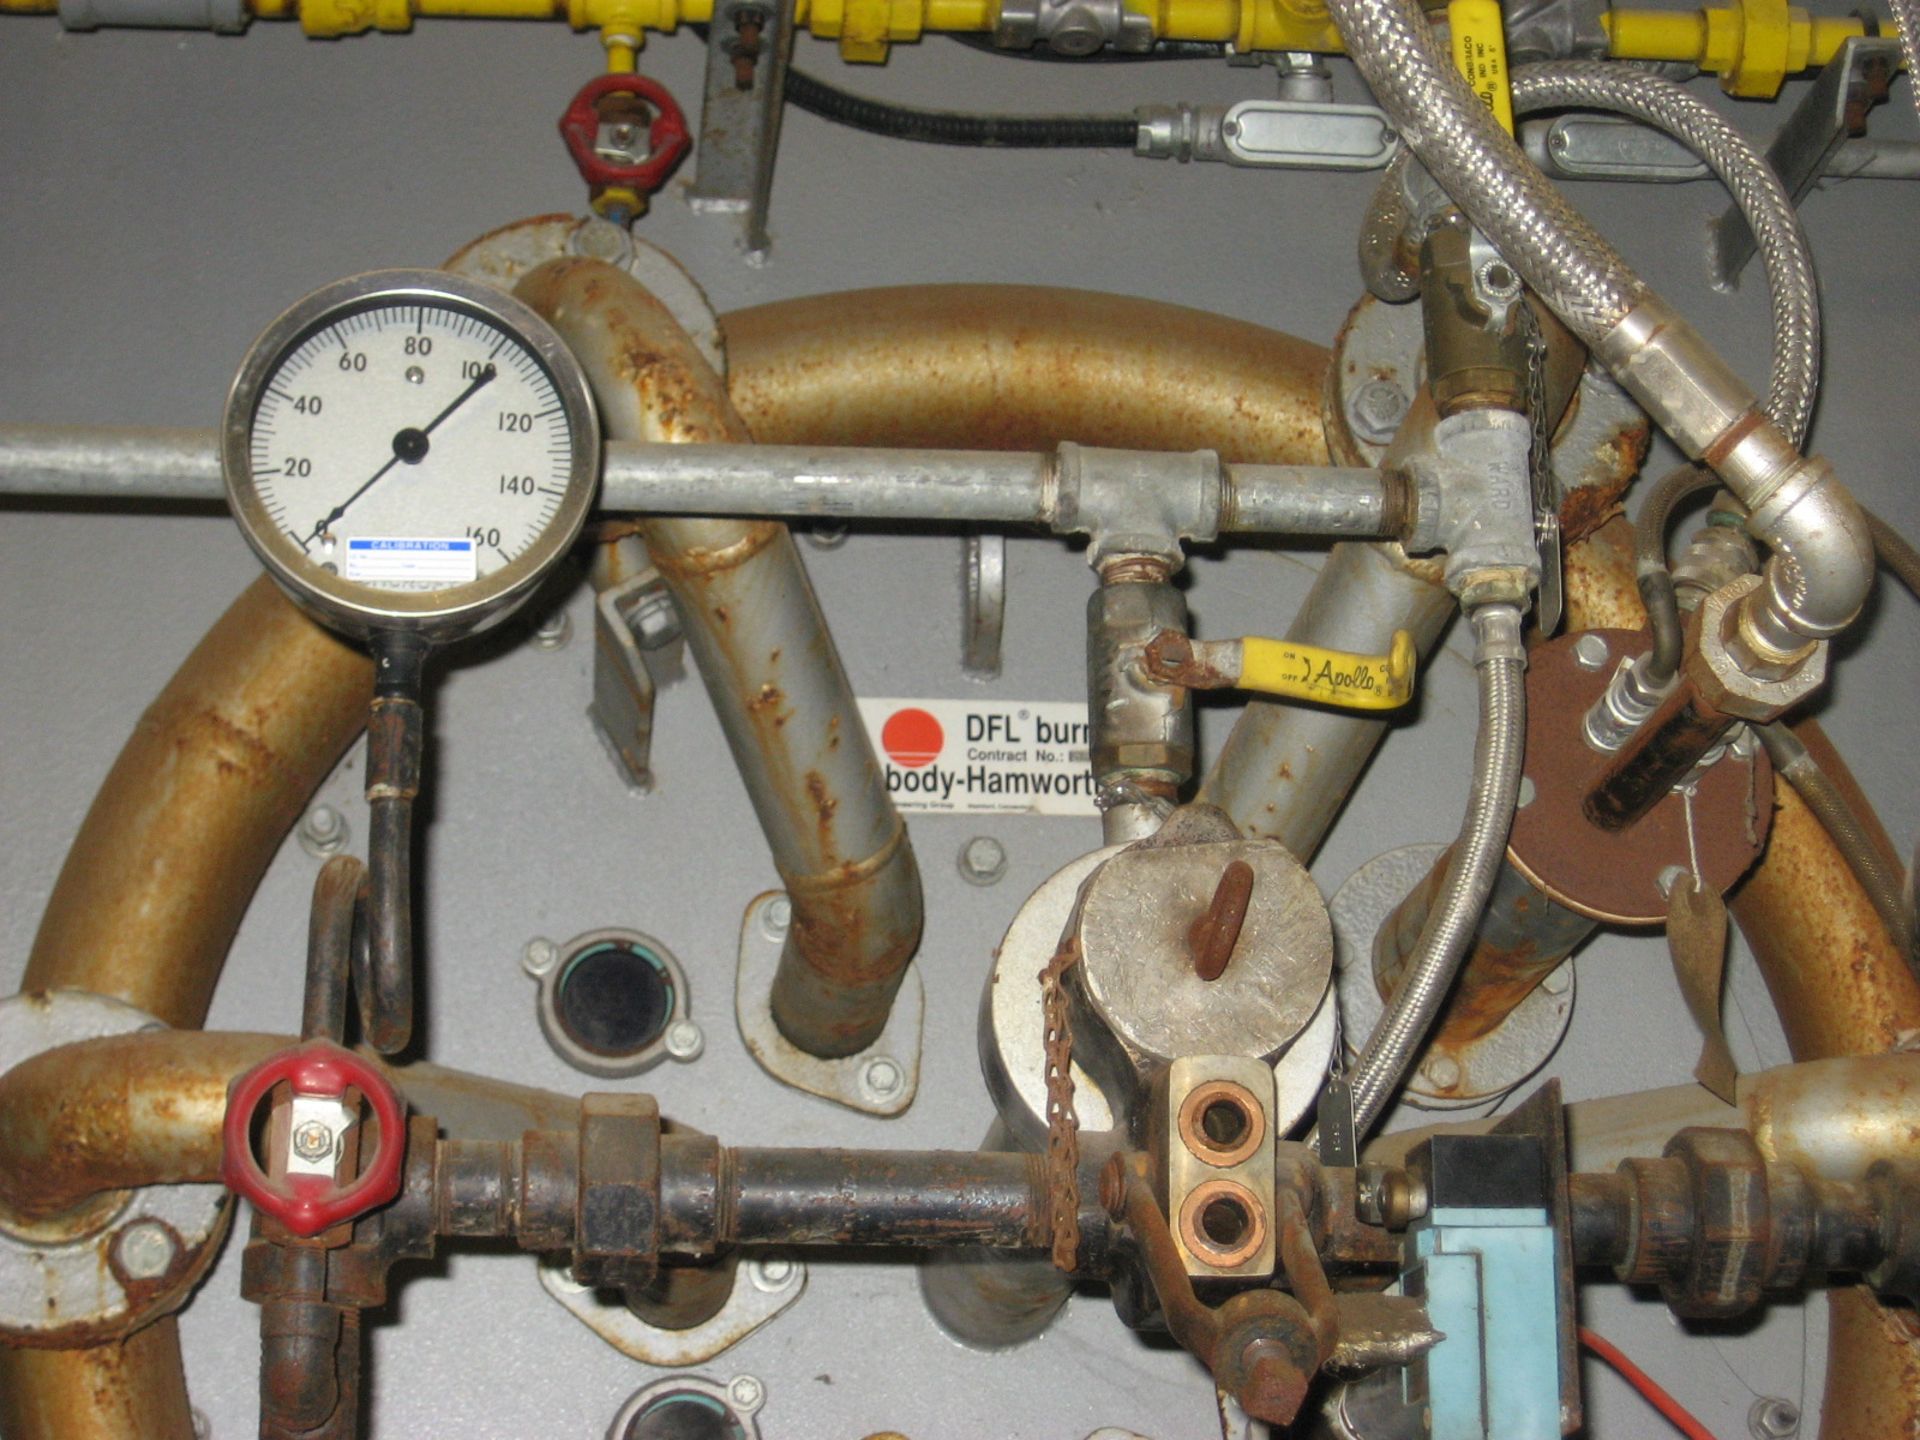 BULK BID FOR BOILER BUILDING AND ALL ATTACHED CONTENTS (EXCLUDING GENERATOR AND AUTOMATIC TRANSFER - Image 144 of 246